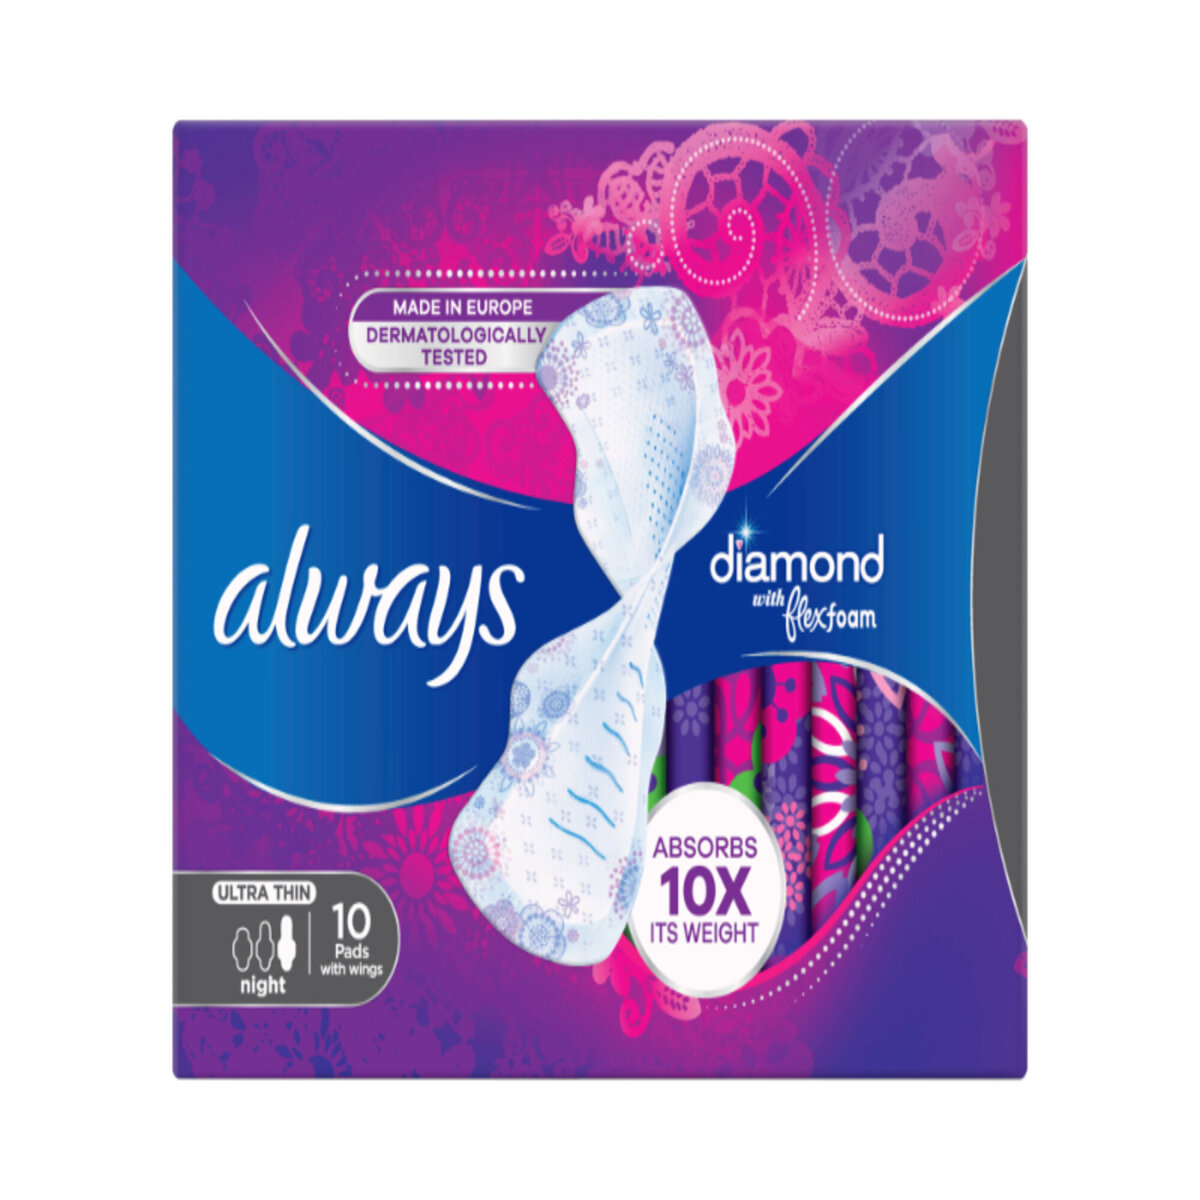 Always Radiant Flex Foam Overnight Pads With Wings Size 4 - 20 CT 6 Pack